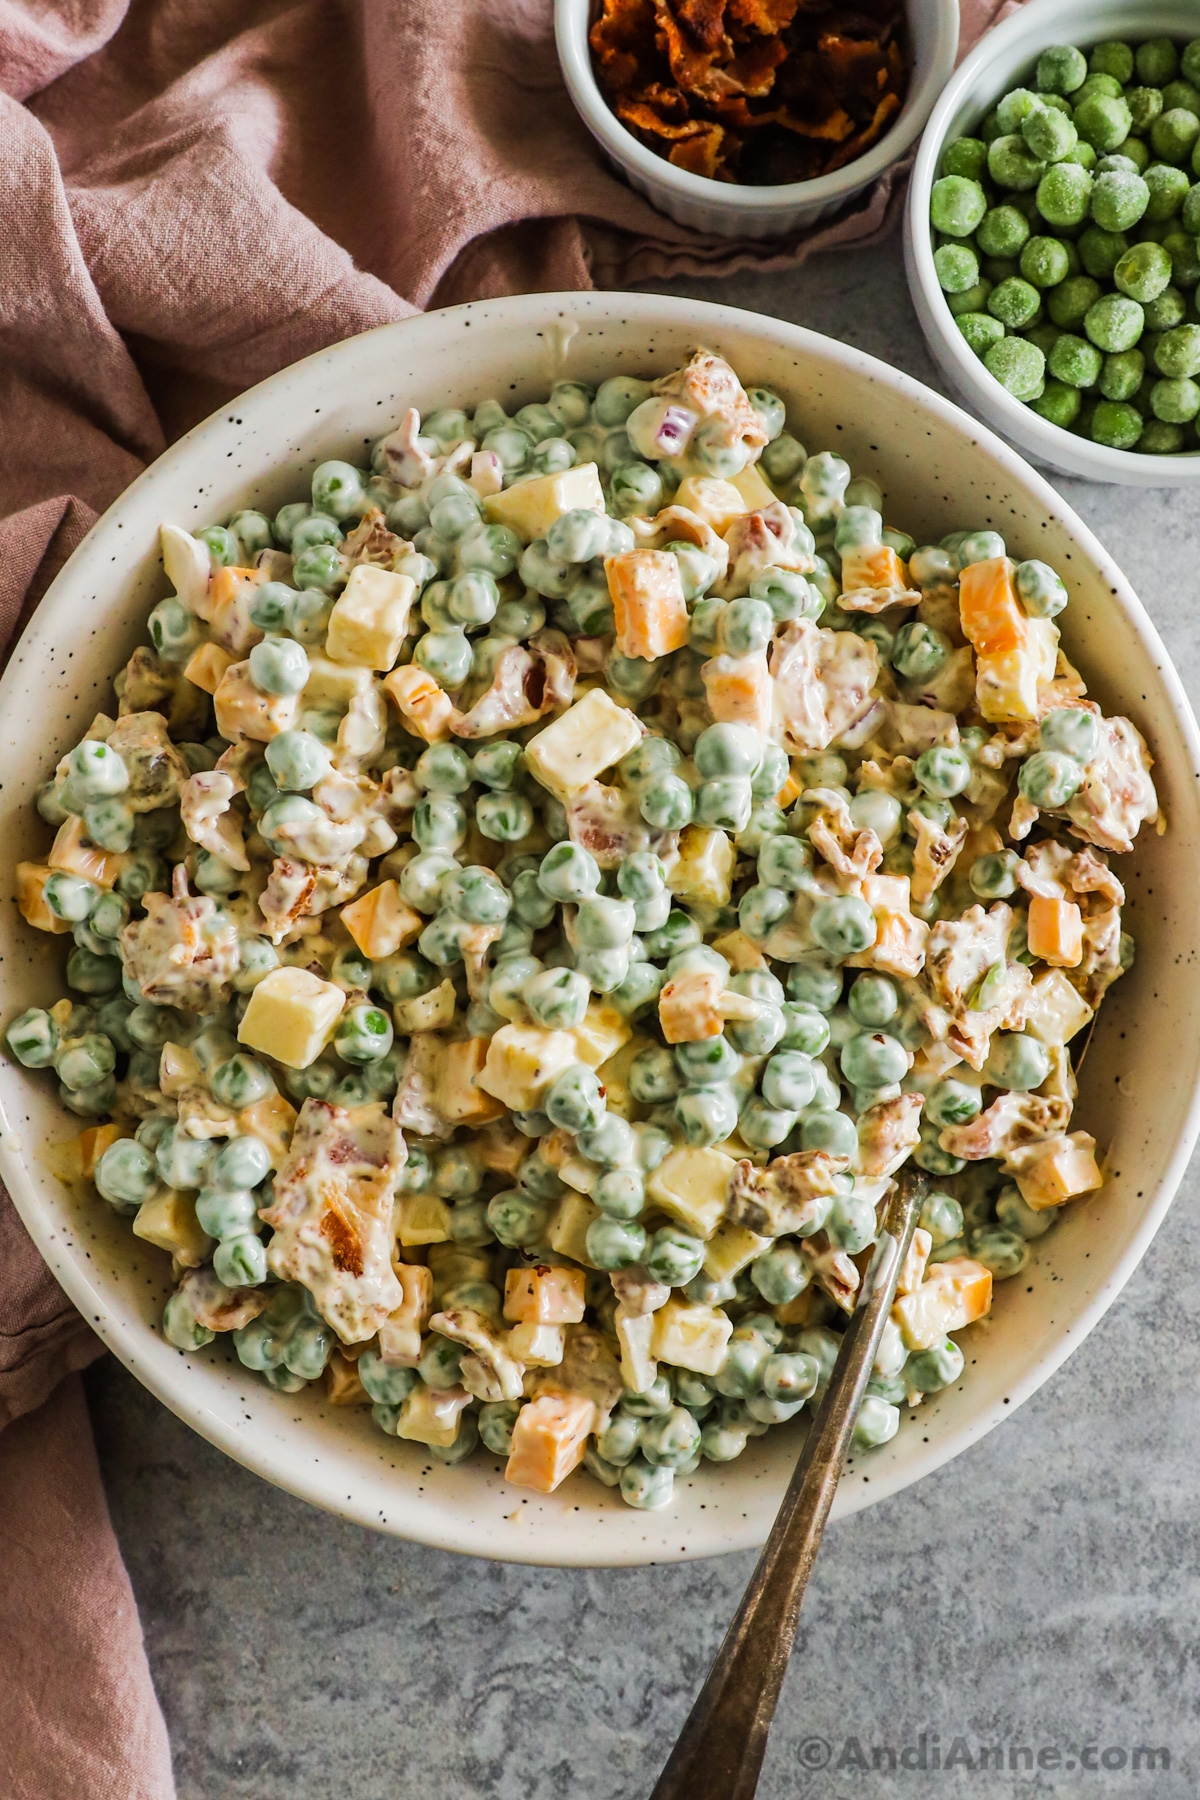 Creamy pea salad recipe with cubed cheese, bacon and onion in a bowl. Small bowls of crumbled bacon and frozen peas surround the bowl.